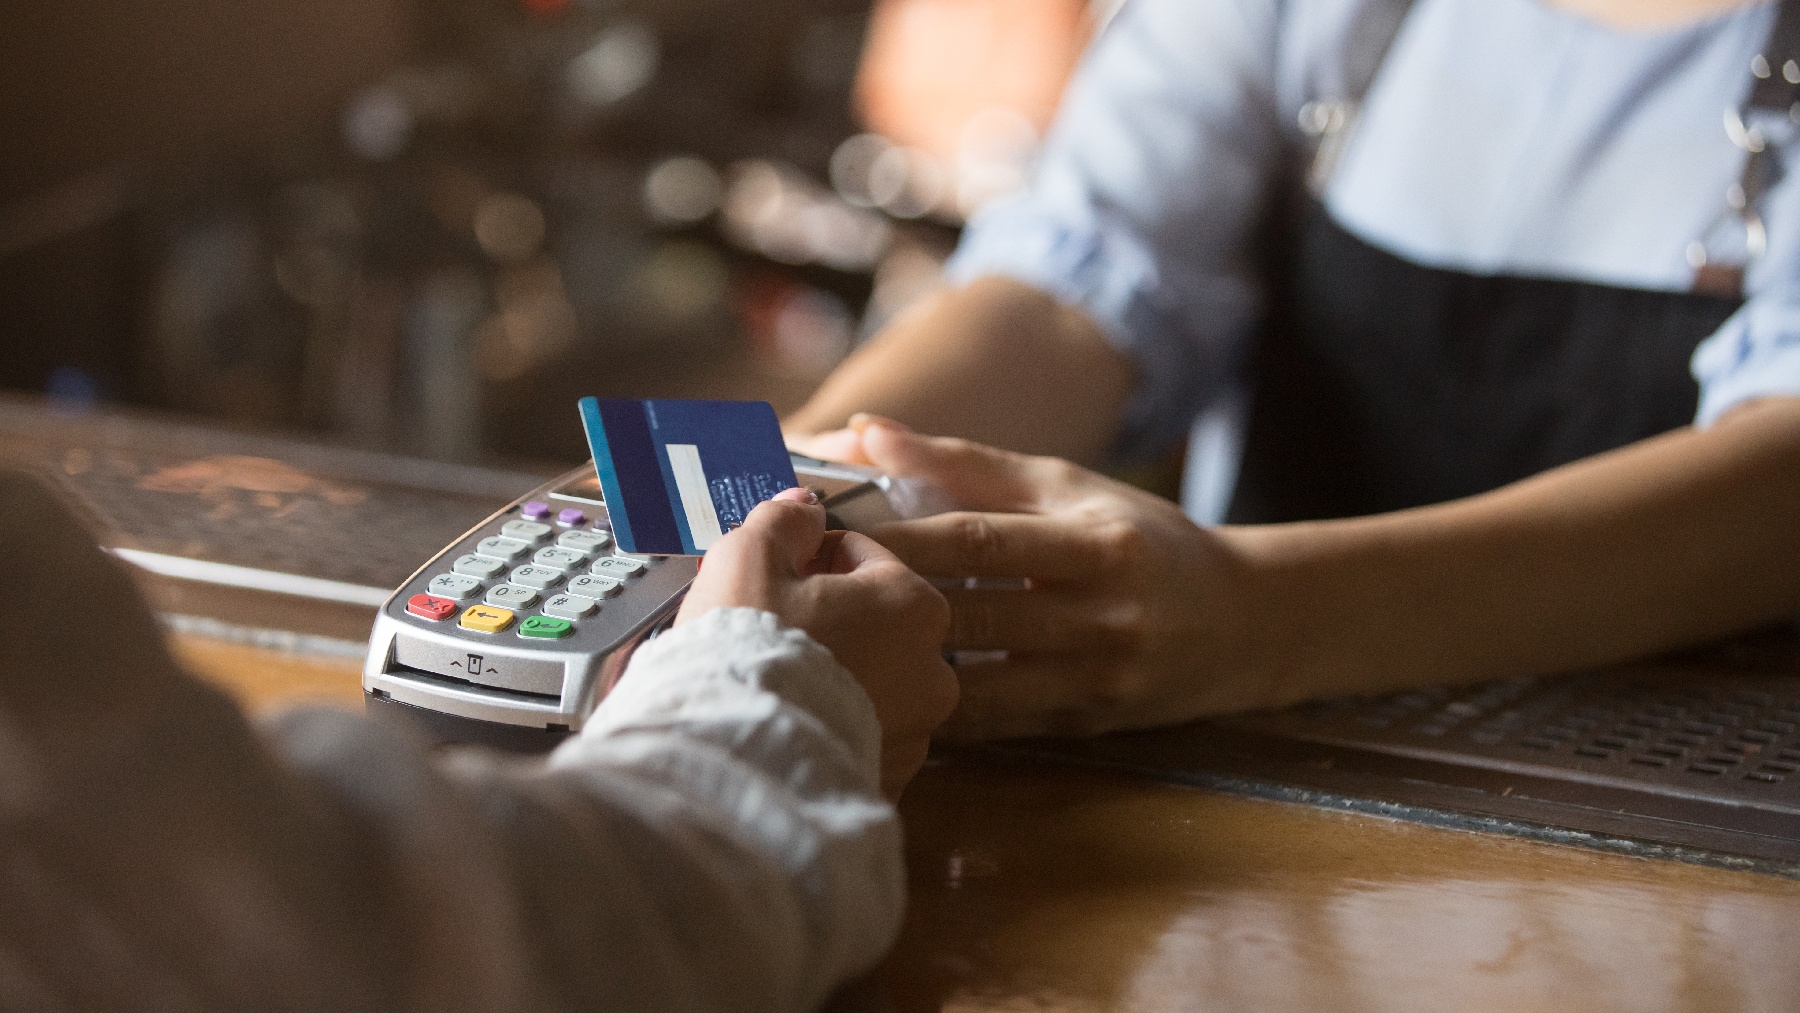 A small business owner is accepting a credit card payment from one of his customers